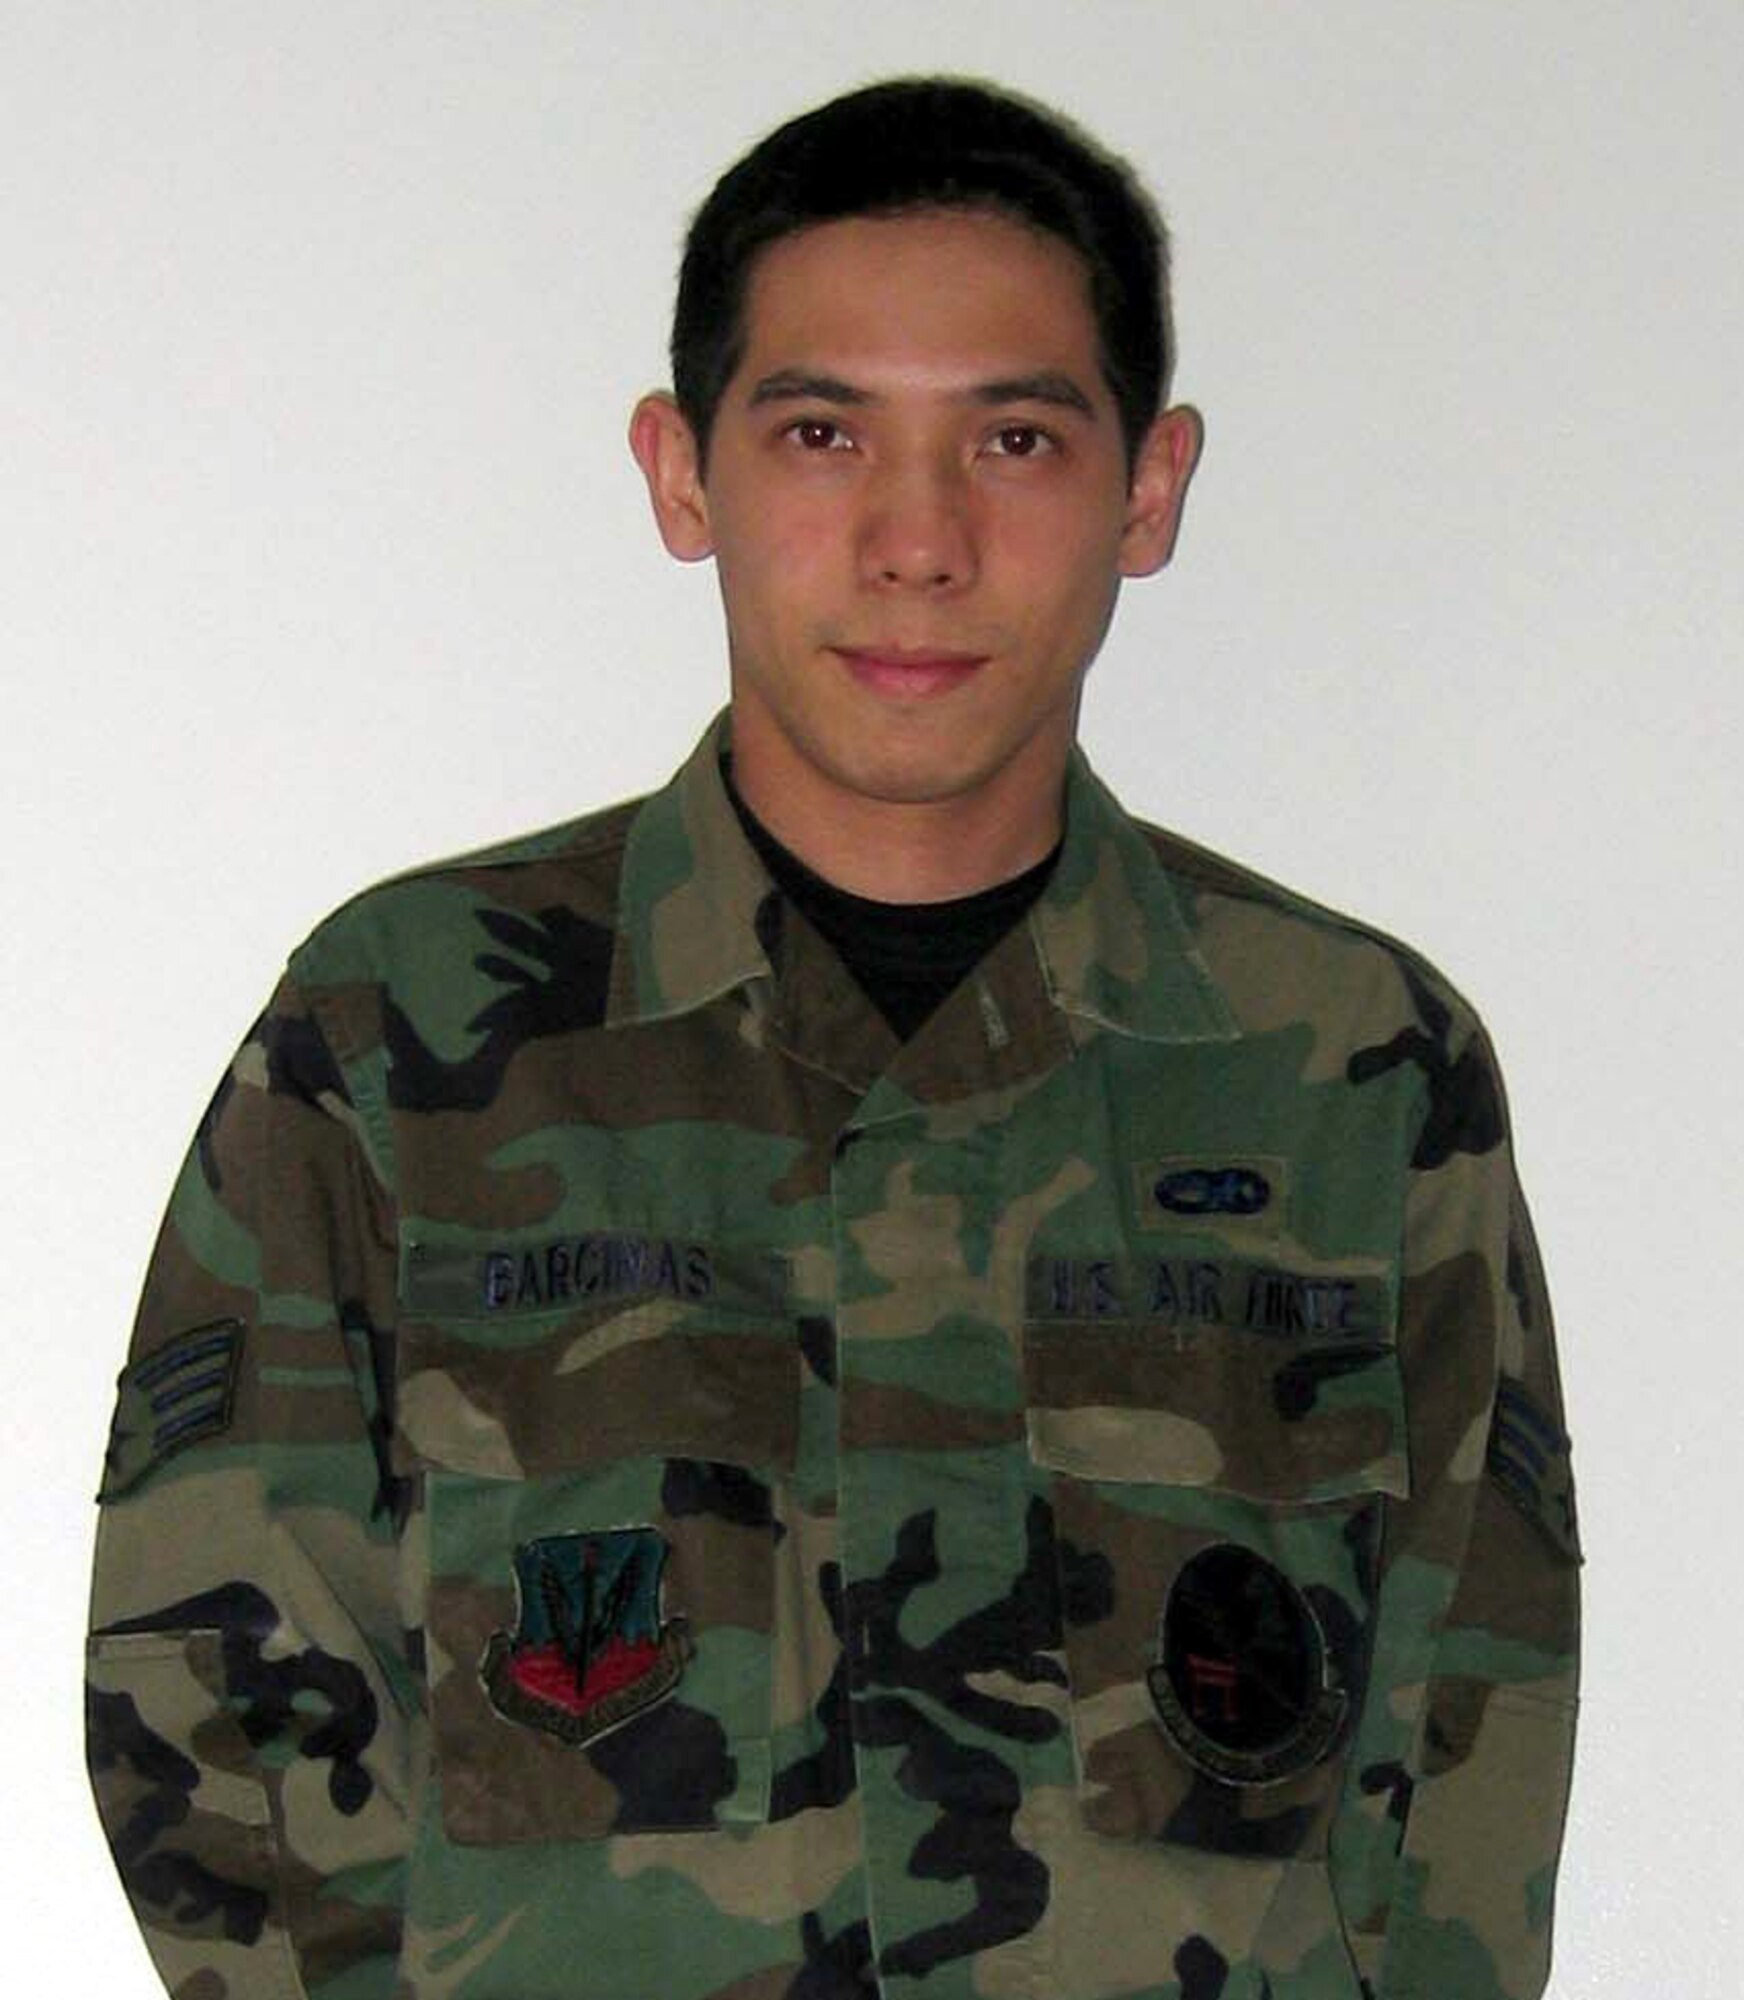 Name: Senior Airman Rhandolf Barcinas
Unit: 373d Support Squadron
Duty title: Mission computer systems technician
Hometown:  Northern Marianas Islands

“Airman Barcinas has stepped up to be one of the prime leaders in his work center.  Recently, the work center has lost several qualified technicians due to permanent change of station and unit re-organizations.  Airman Barcinas quickly stepped up to fill the void by providing technical expertise, hands on training and being a positive role model to the junior technicians that recently arrived from technical school. “ 

Tech. Sgt. Marvin Jordan
Mission Computer Systems Maintenance NCO in charge
